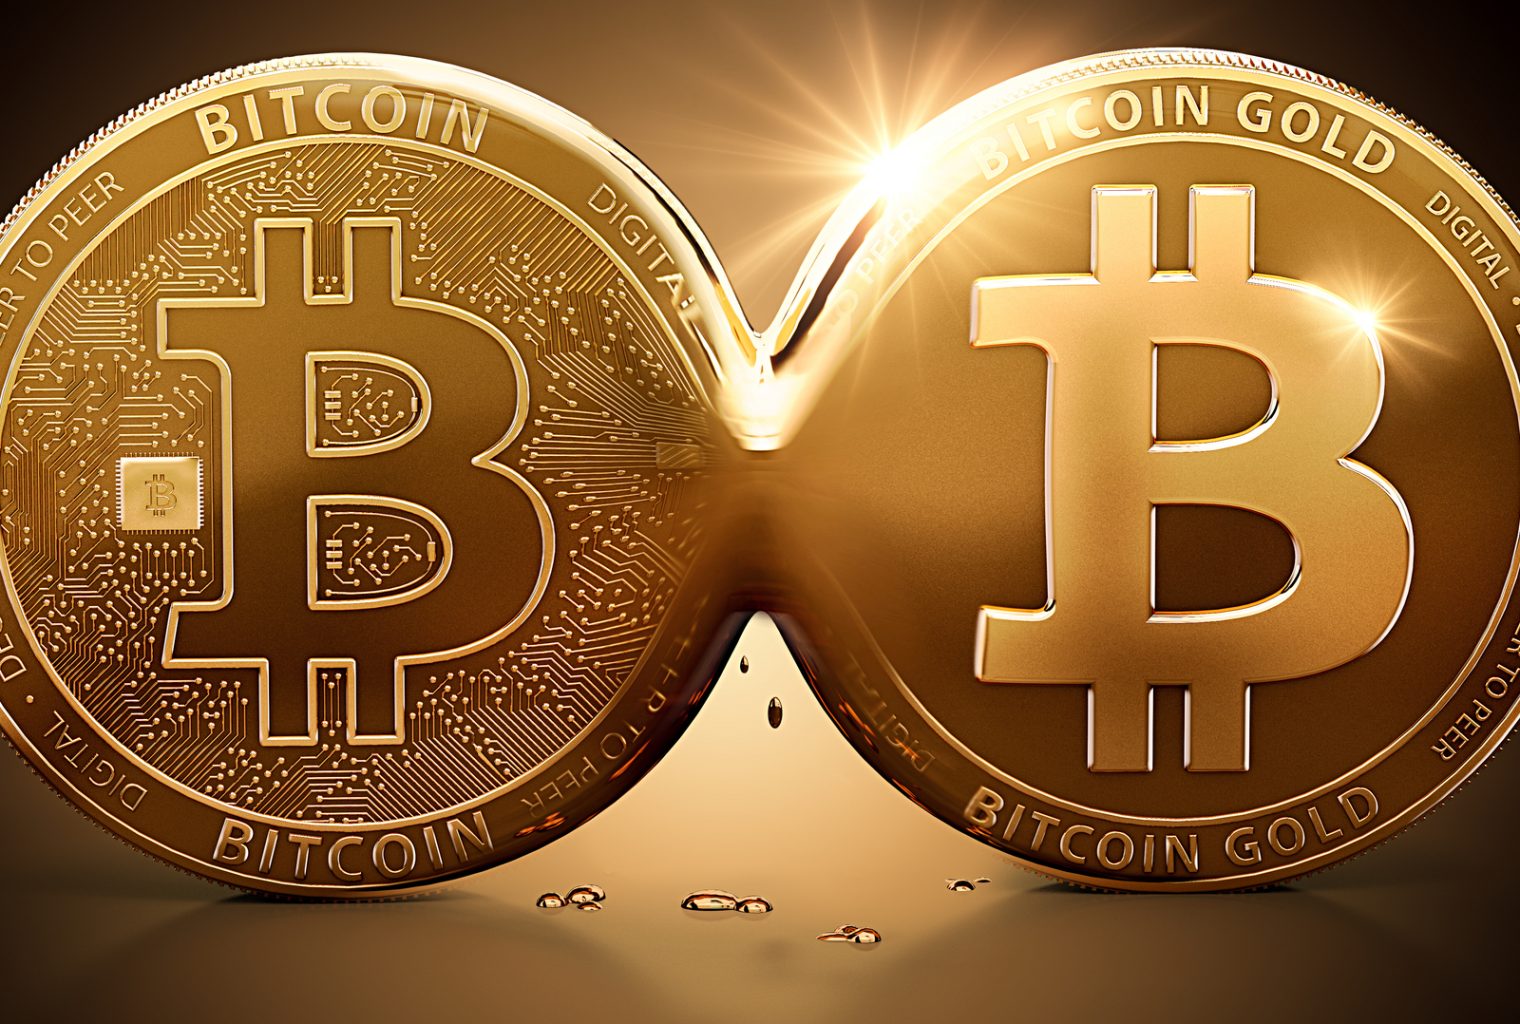 7 reasons why you should not invest in bitcoins, cryptocurrencies